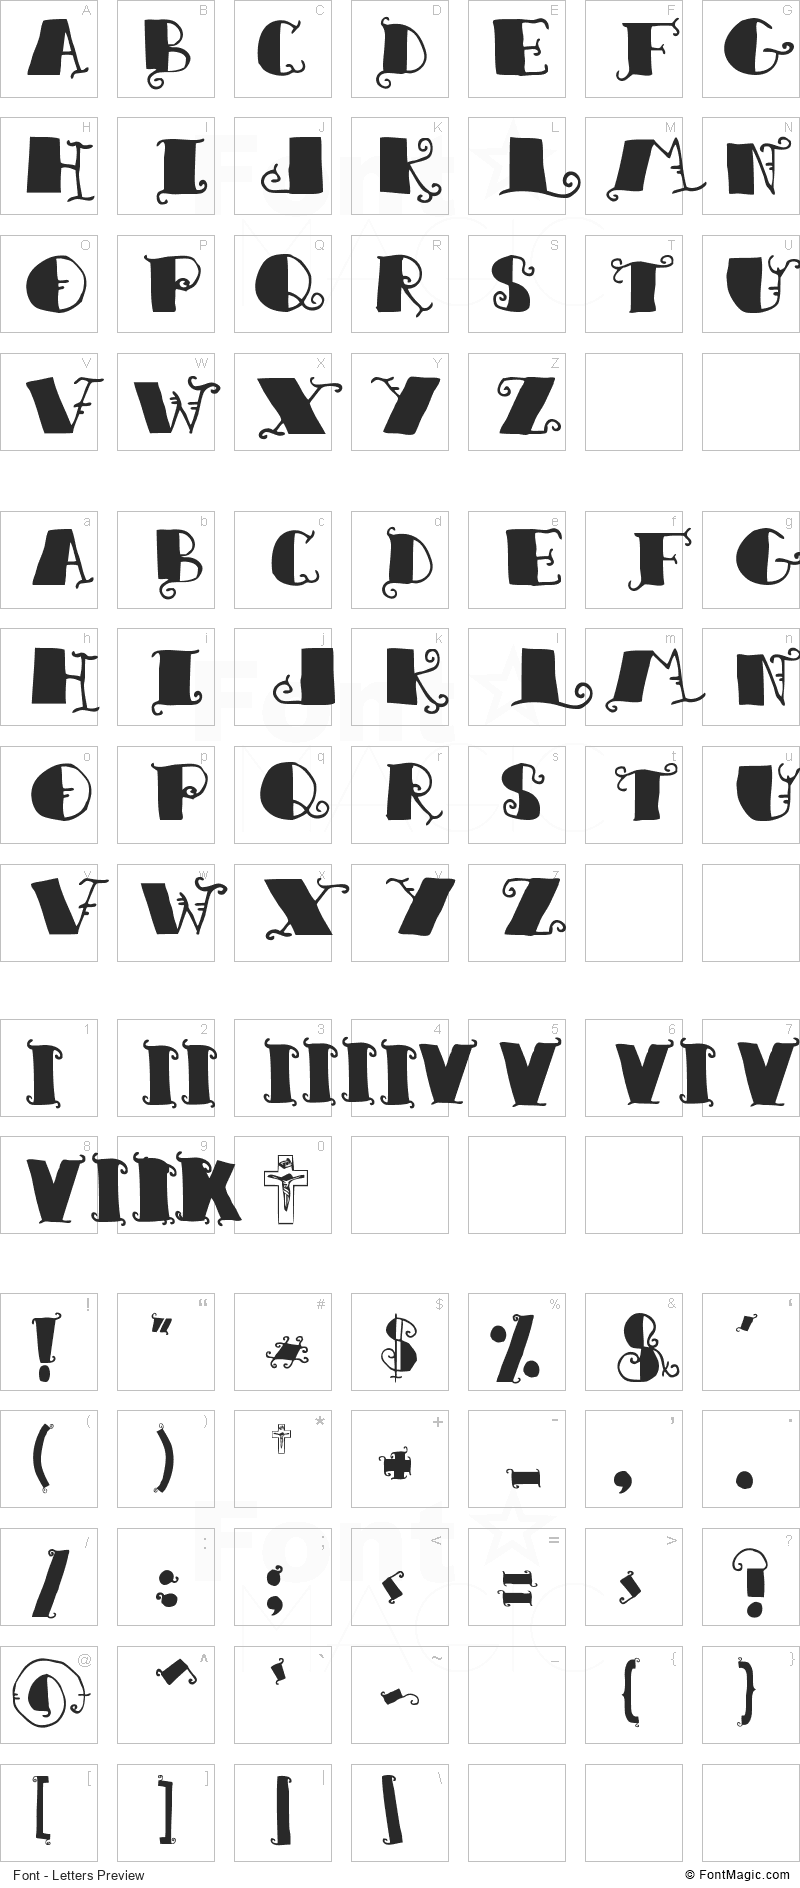 Woodcutter Amor de Madre Font - All Latters Preview Chart